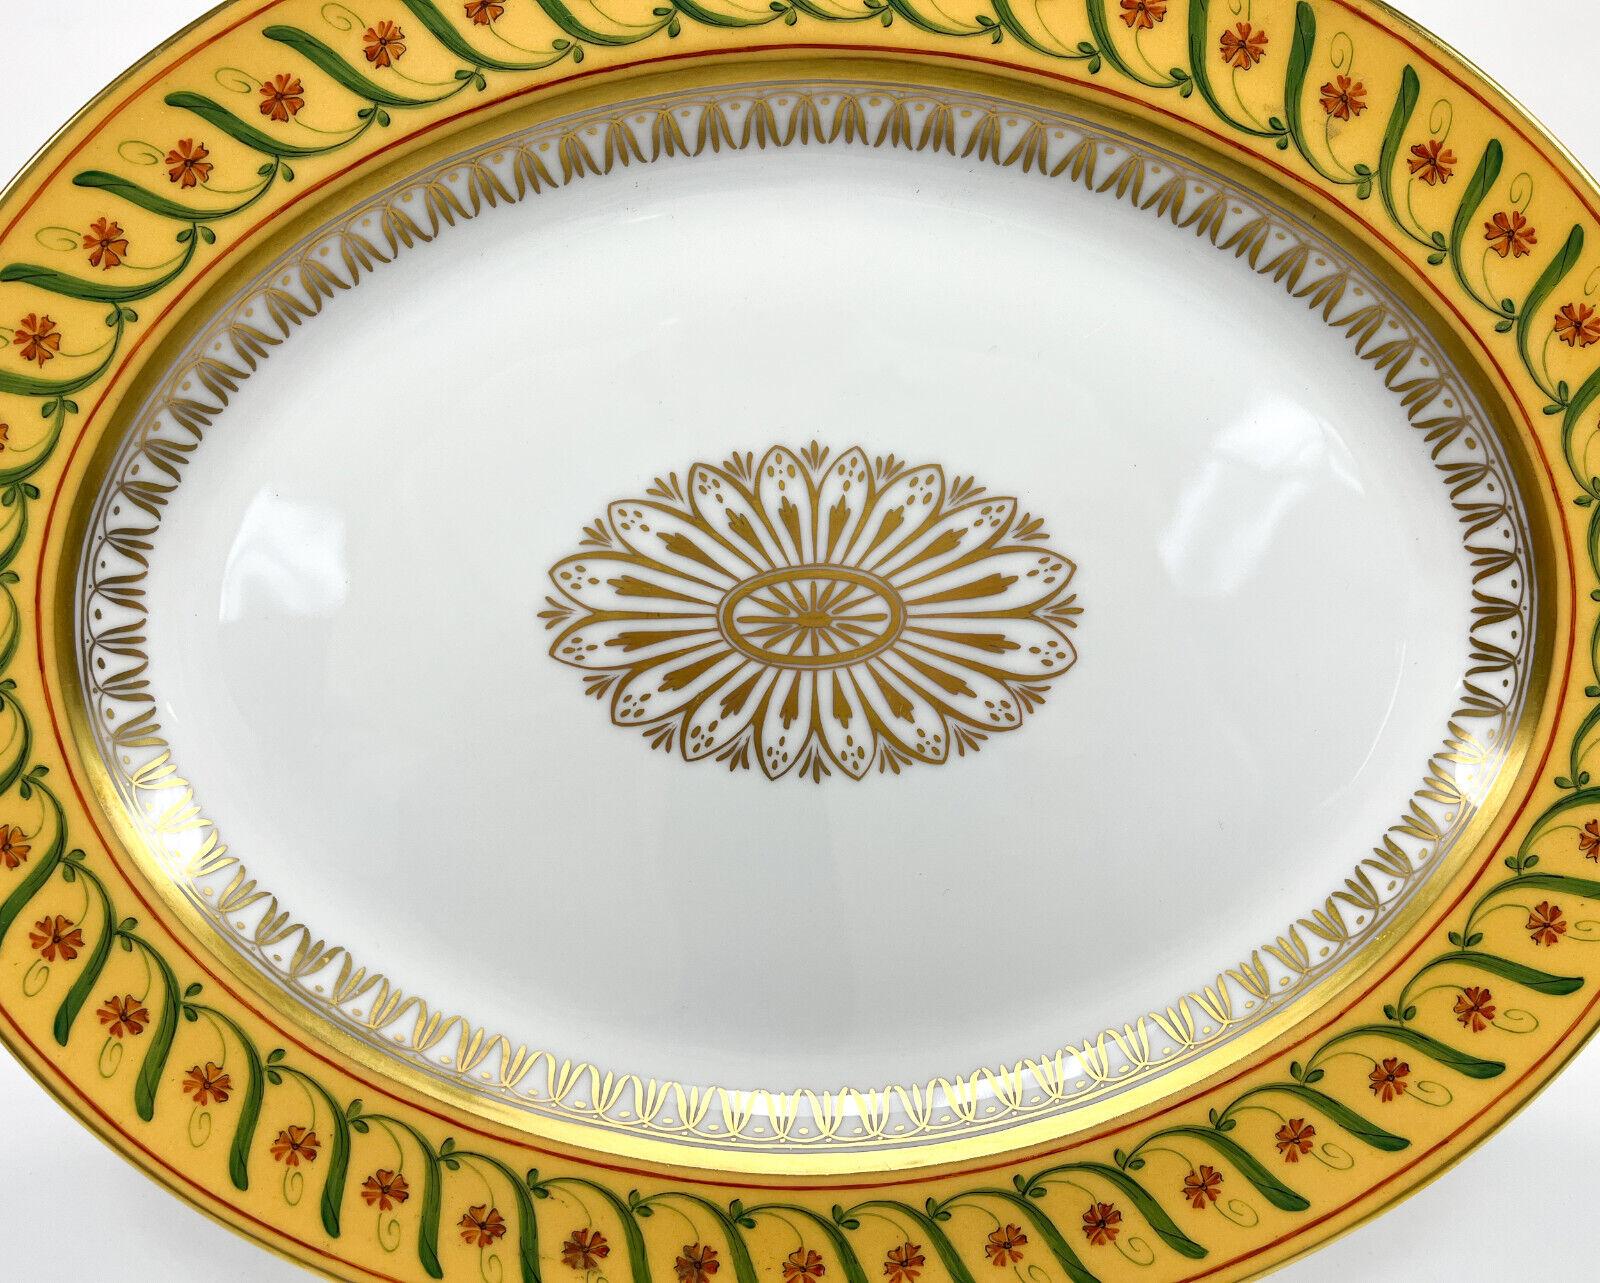 Tiffany Le Tallec Private stock porcelain oval serving tray in Directoir

A yellow ground with hand painted flowers and leaves throughout. Gilt florals to the center. Tiffany & Co. Private stock marks to the underside.

Additional